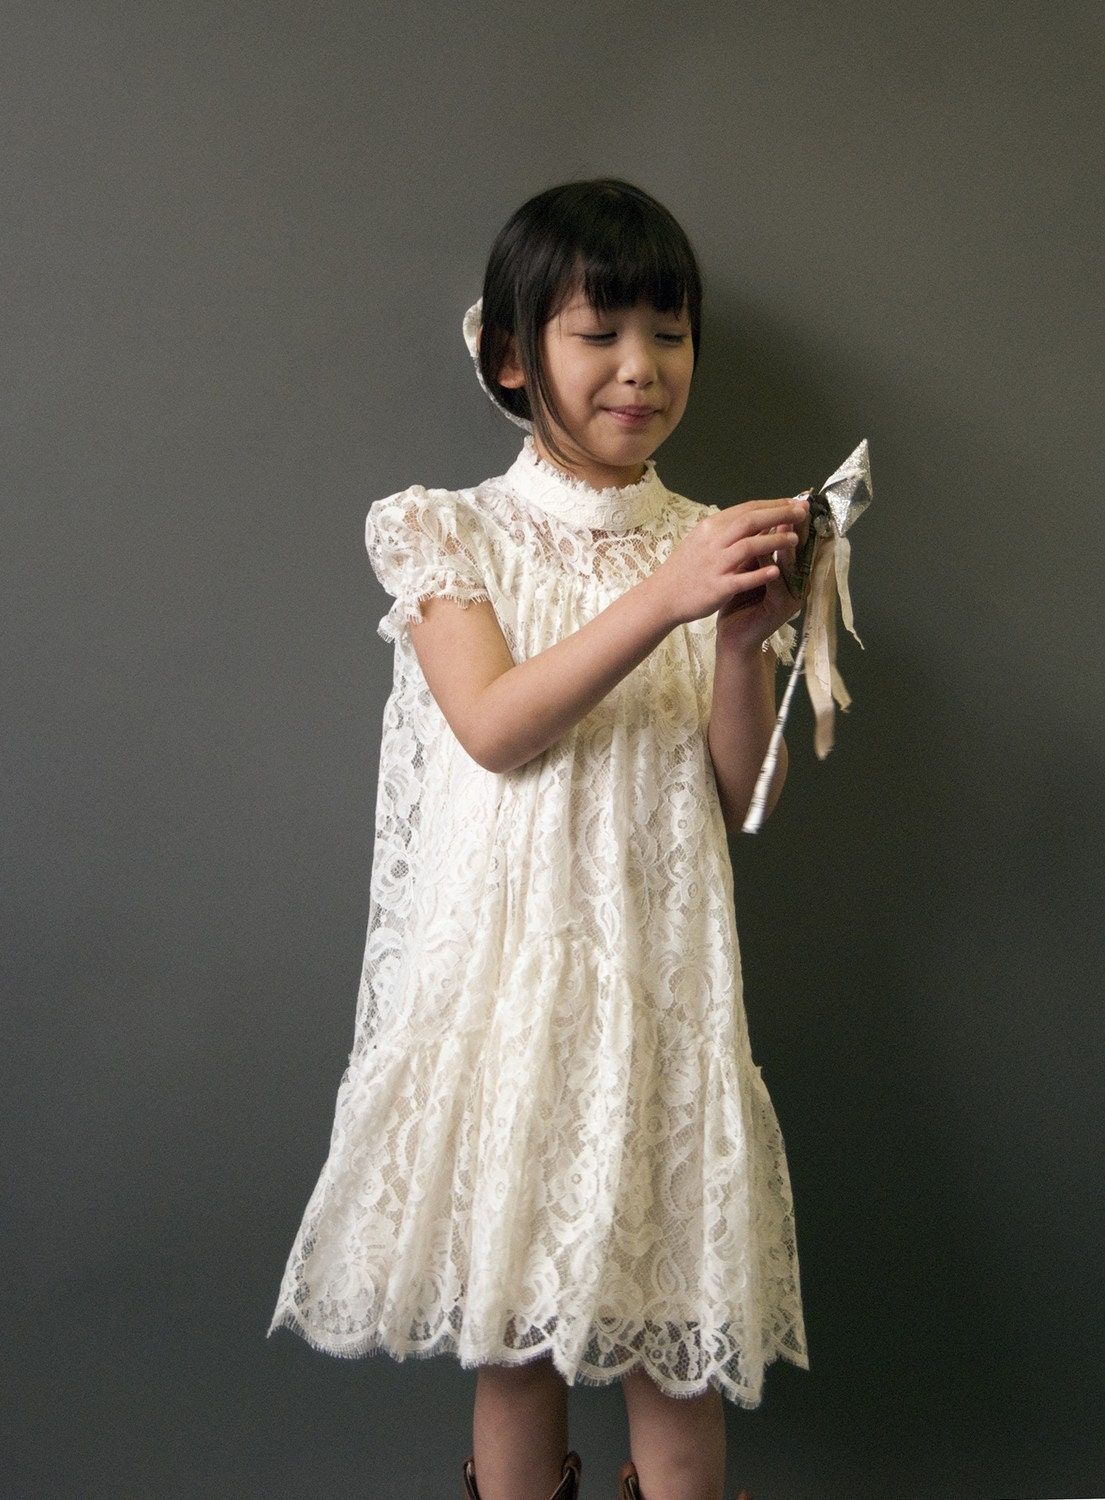 Victorian Lace Flower Girl Dress, Victorian Communion Dress, Ivory or White Lace, vintage style "Olga" CUSTOM size